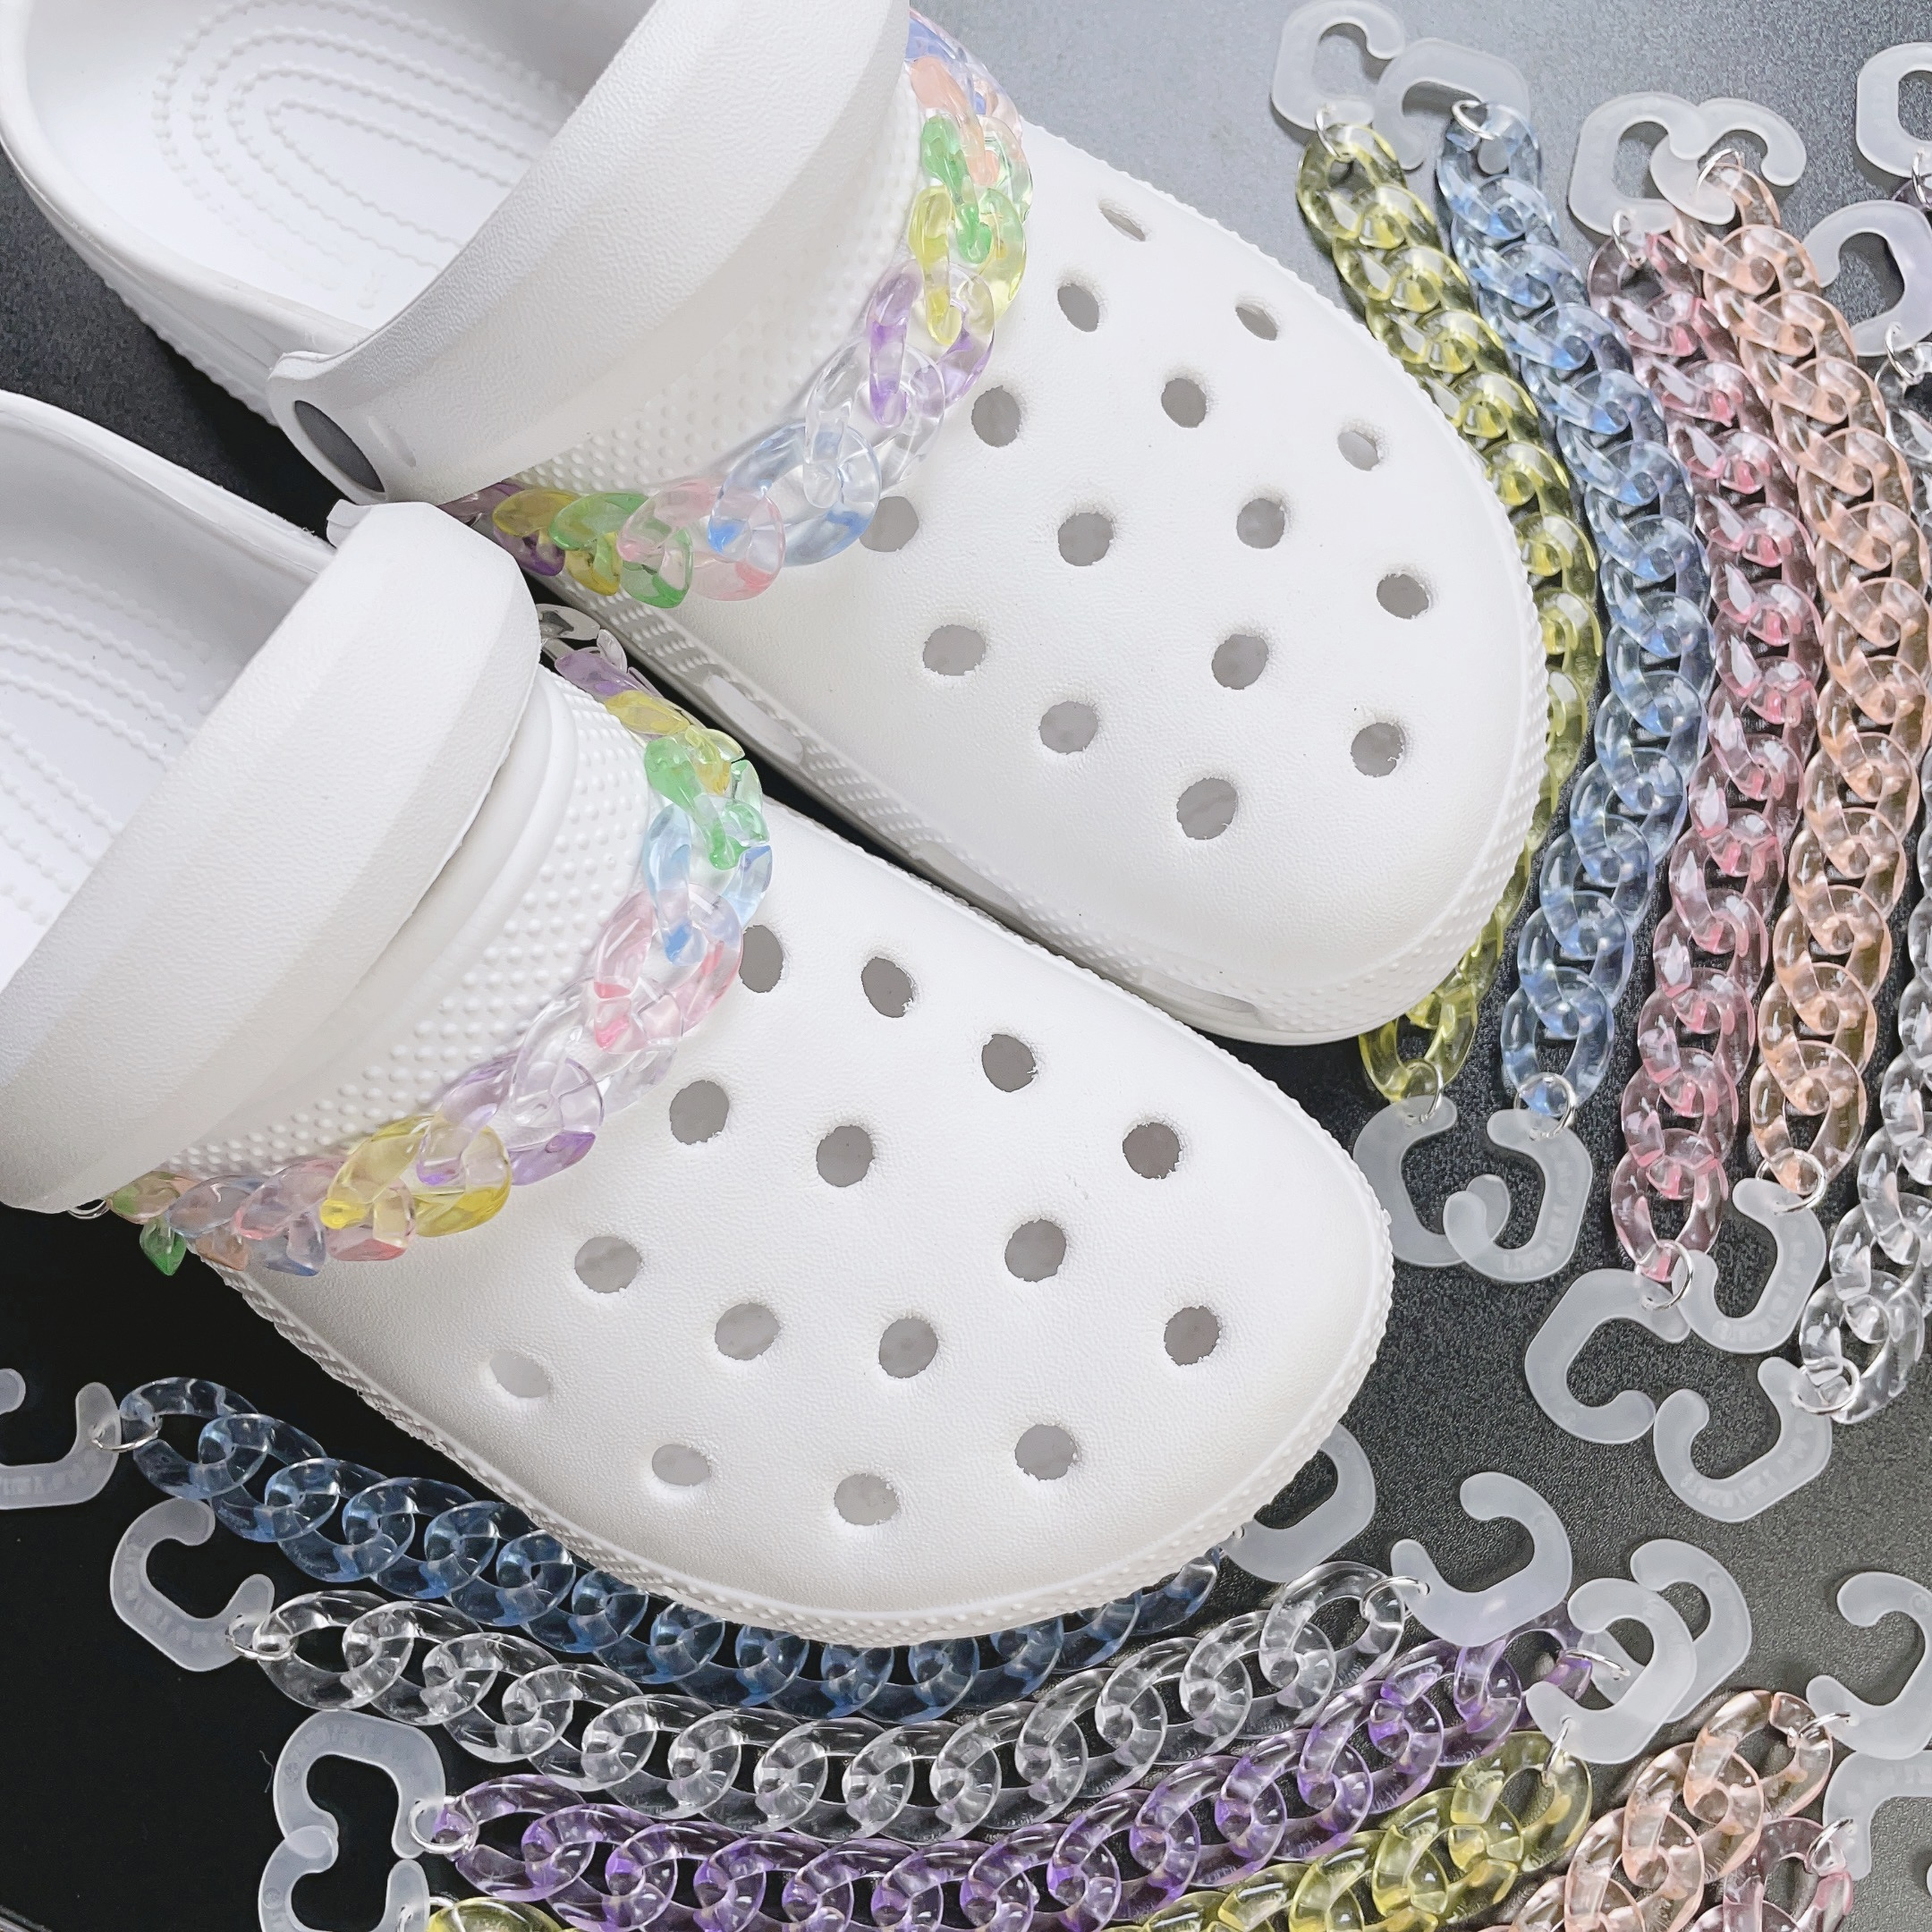 2Pcs Bling Croc Chains for Clog Shoe Decoration Metal Chain for Shoes  Charms Croc Decoration Sandals for Women Girls Party Favors Birthday Gifts